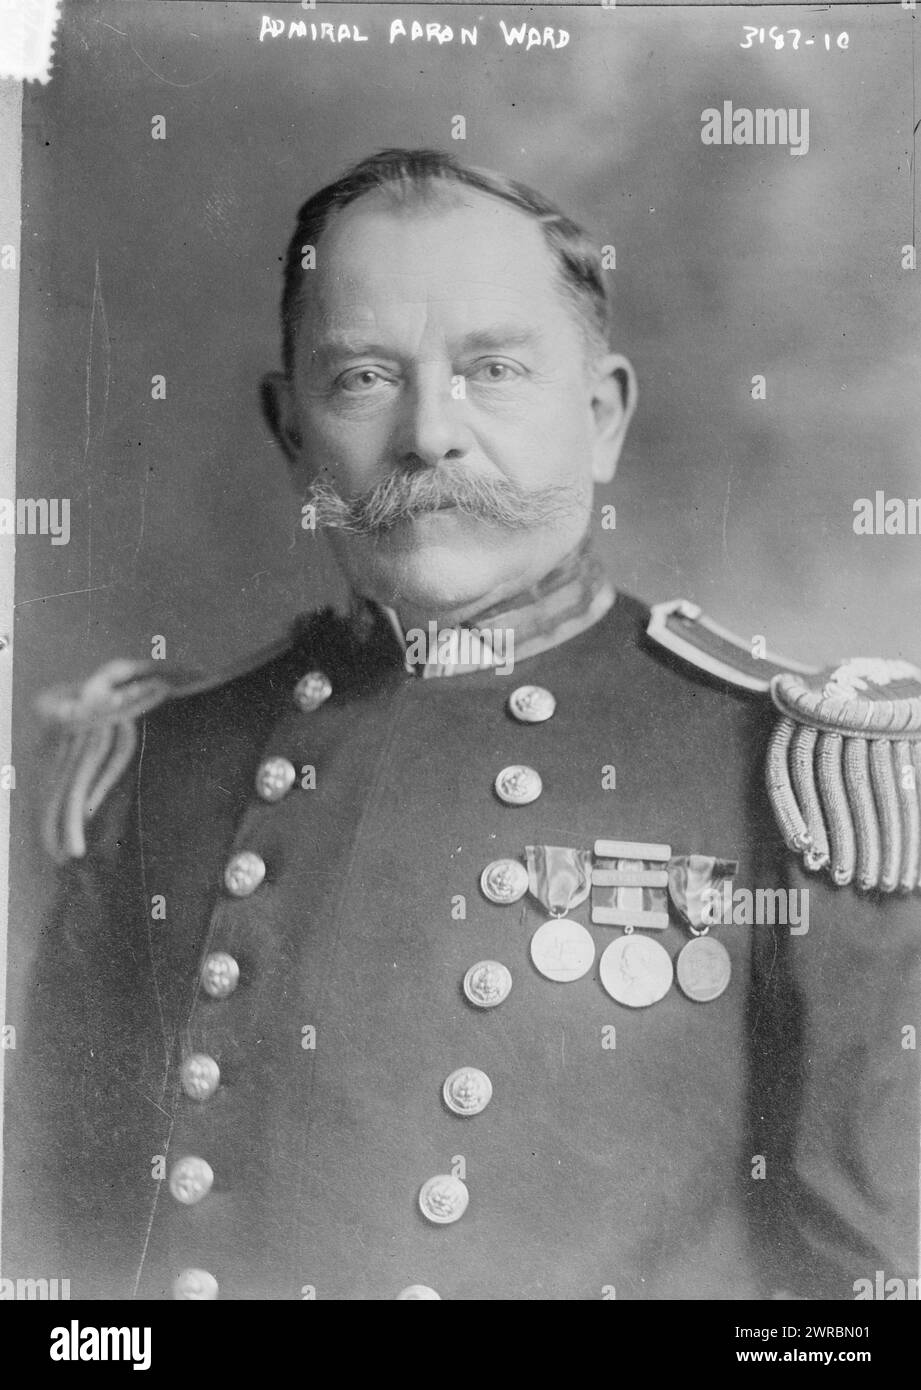 Admiral Aaron Ward, Photograph shows Rear Admiral Aaron Ward (1851-1918), a United States Navy officer during the Spanish-American War., 1914, Glass negatives, 1 negative: glass Stock Photo